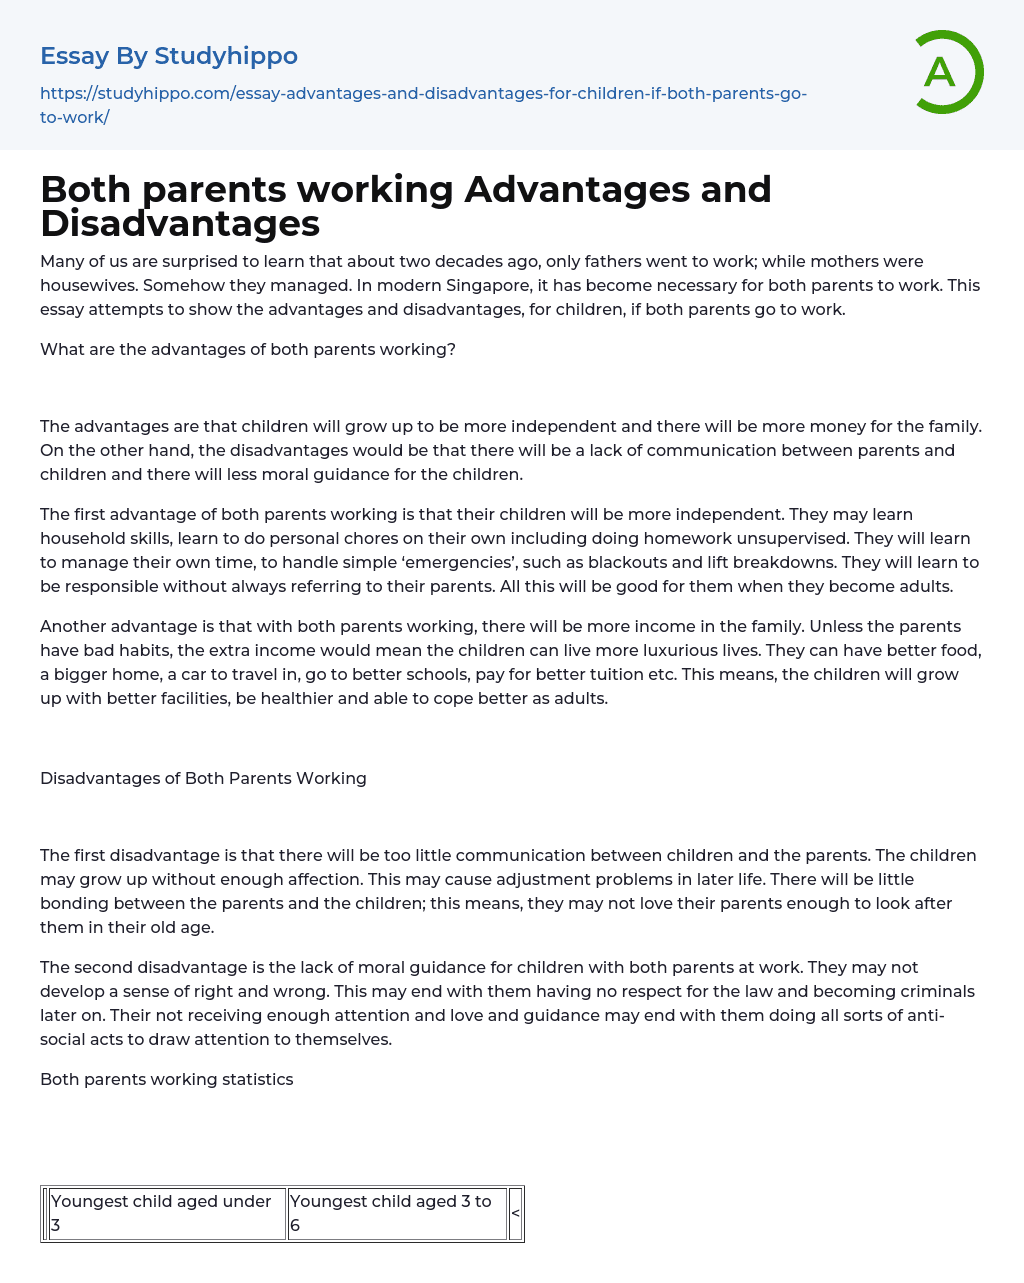 working mothers advantages essay